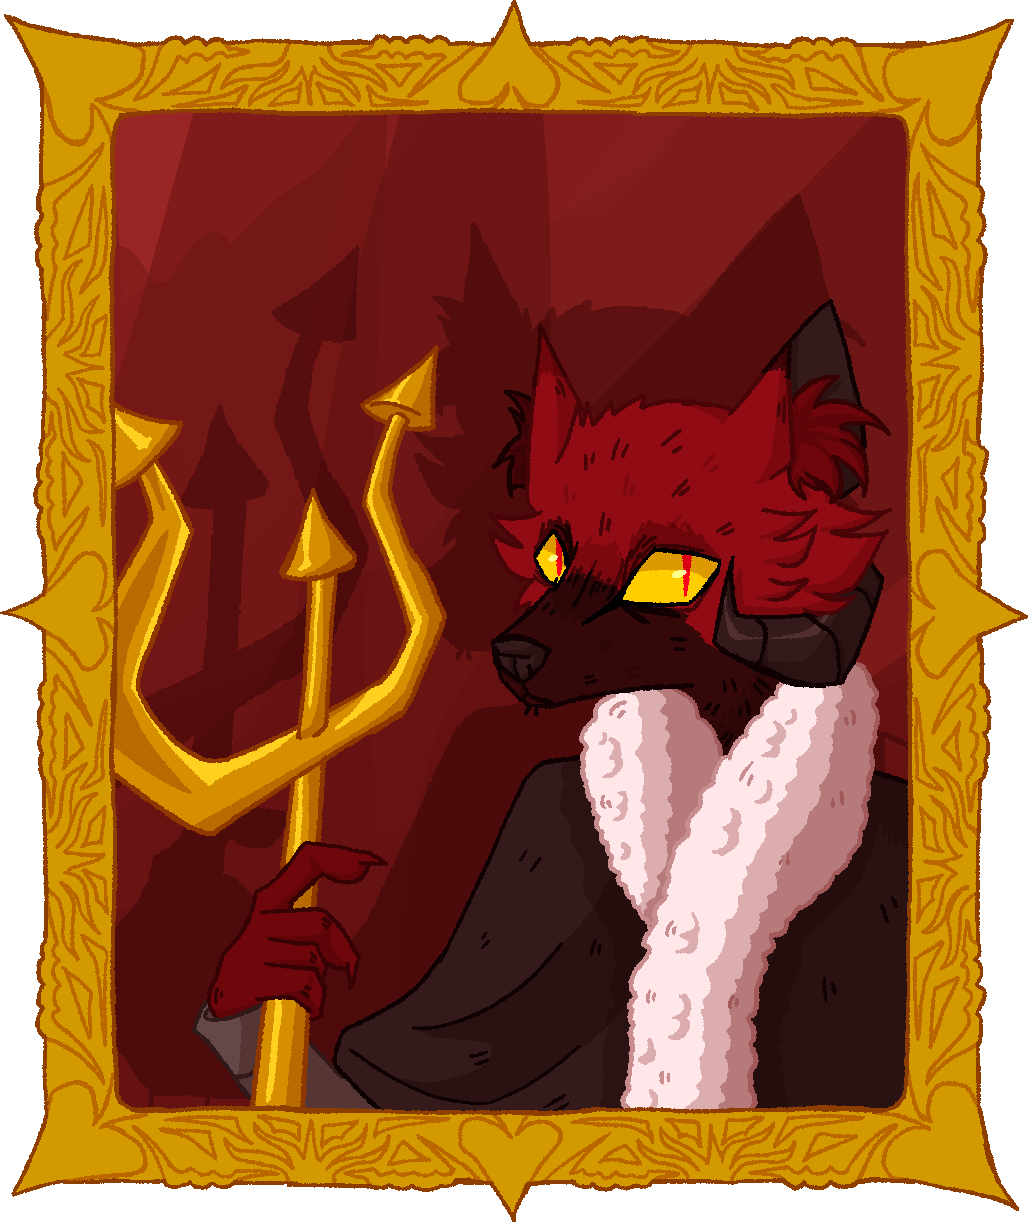 A digital drawing of an anthro wolf from torso up who has a ram horn, is wearing a cape lined with fluff, and holding a trident. The picture is framed by an intricate gold frame which is also clearly drawn.